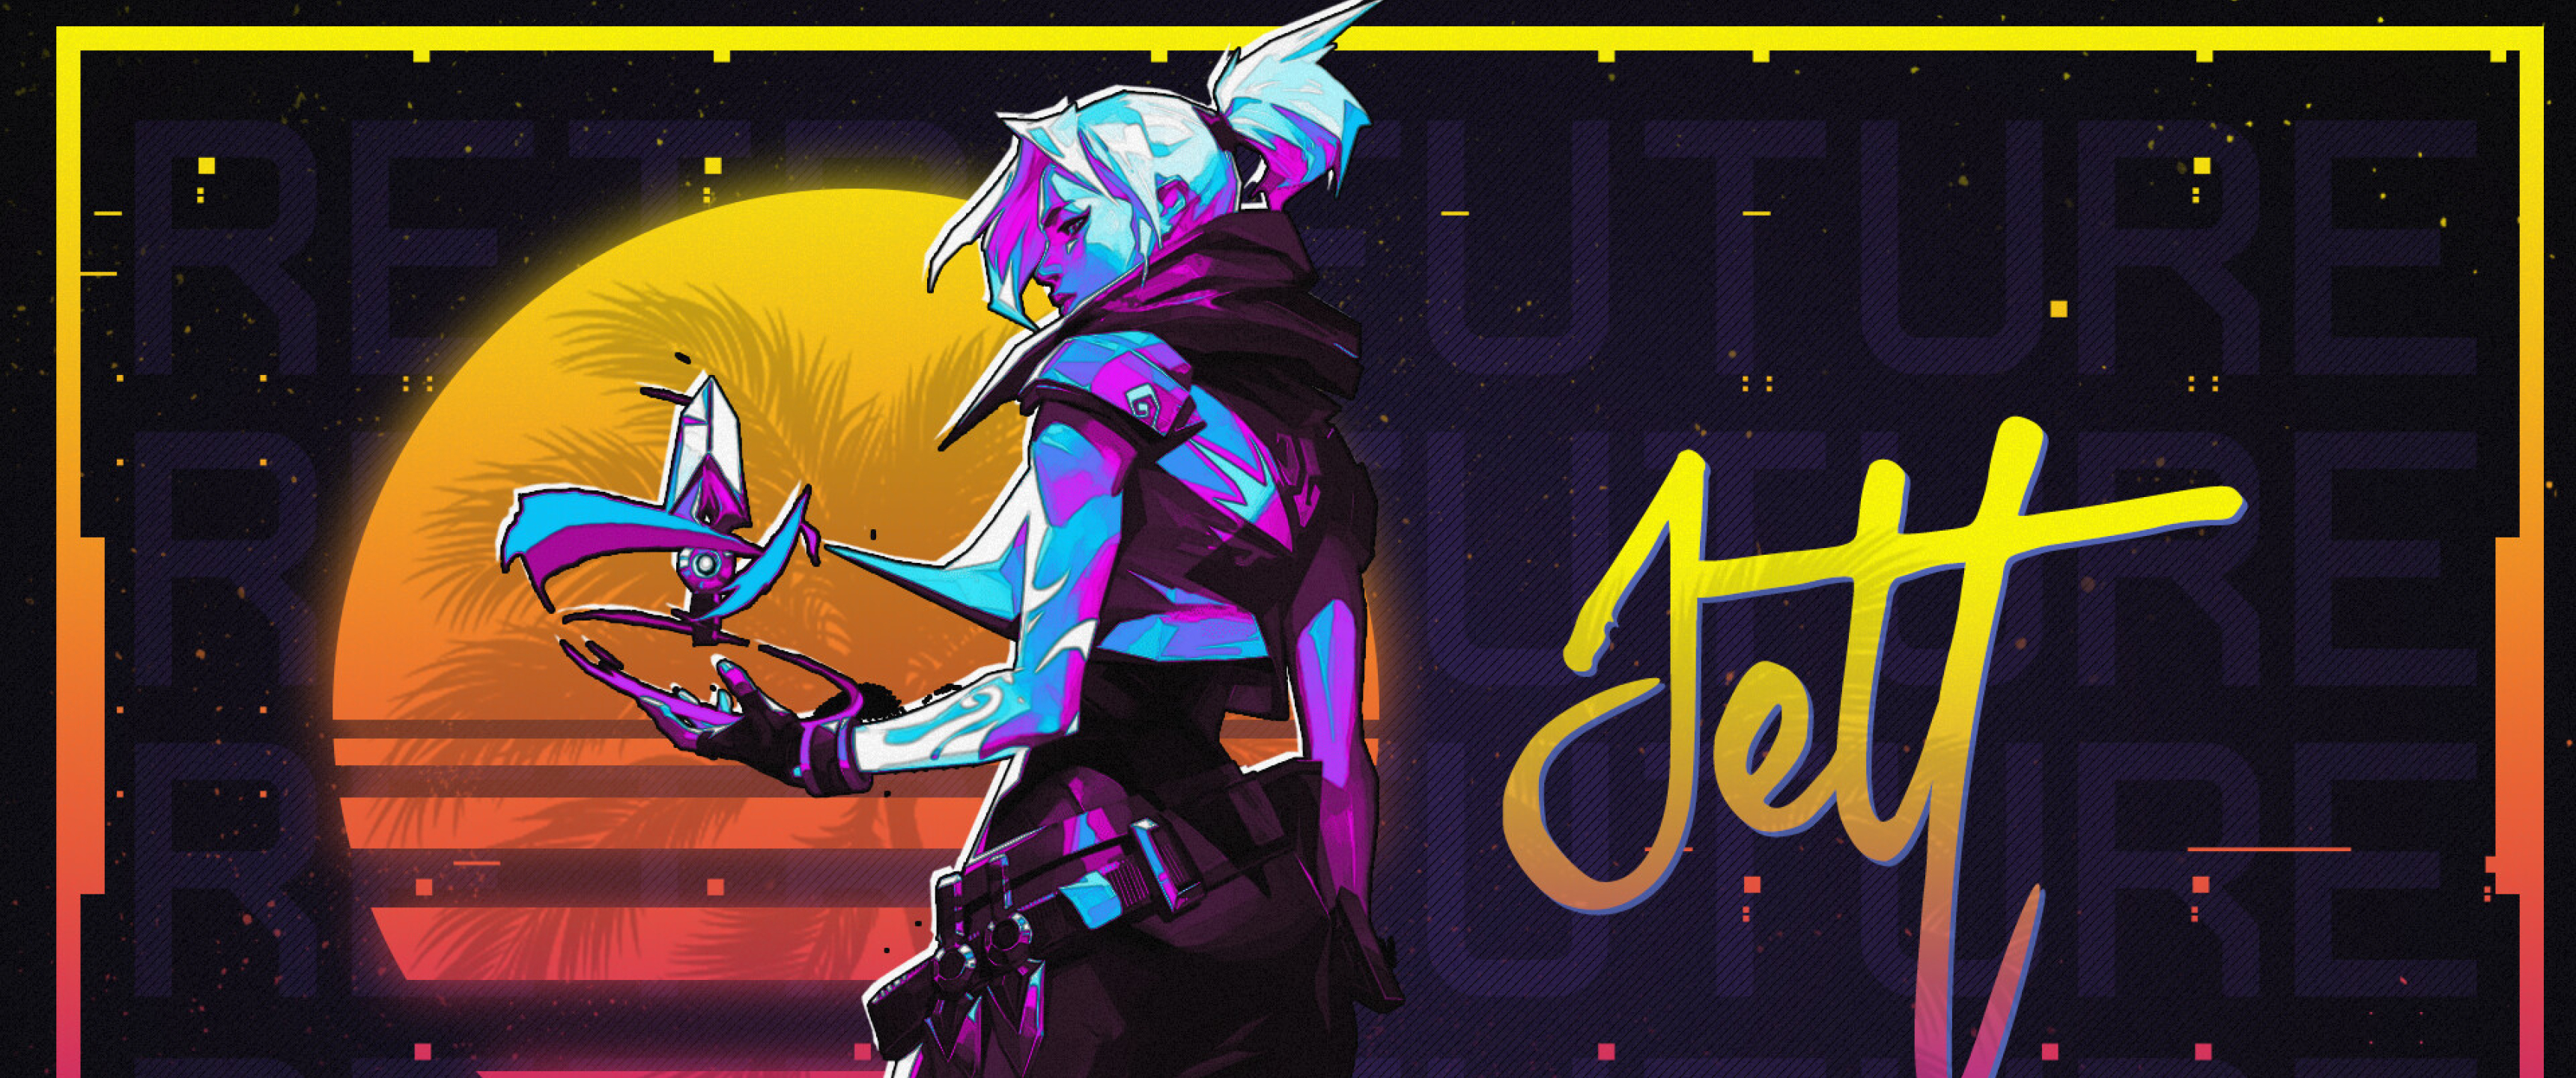 3440x1440 Jett Valorant Neon Art 3440x1440 Resolution Wallpaper, HD Games  4K Wallpapers, Images, Photos and Background - Wallpapers Den